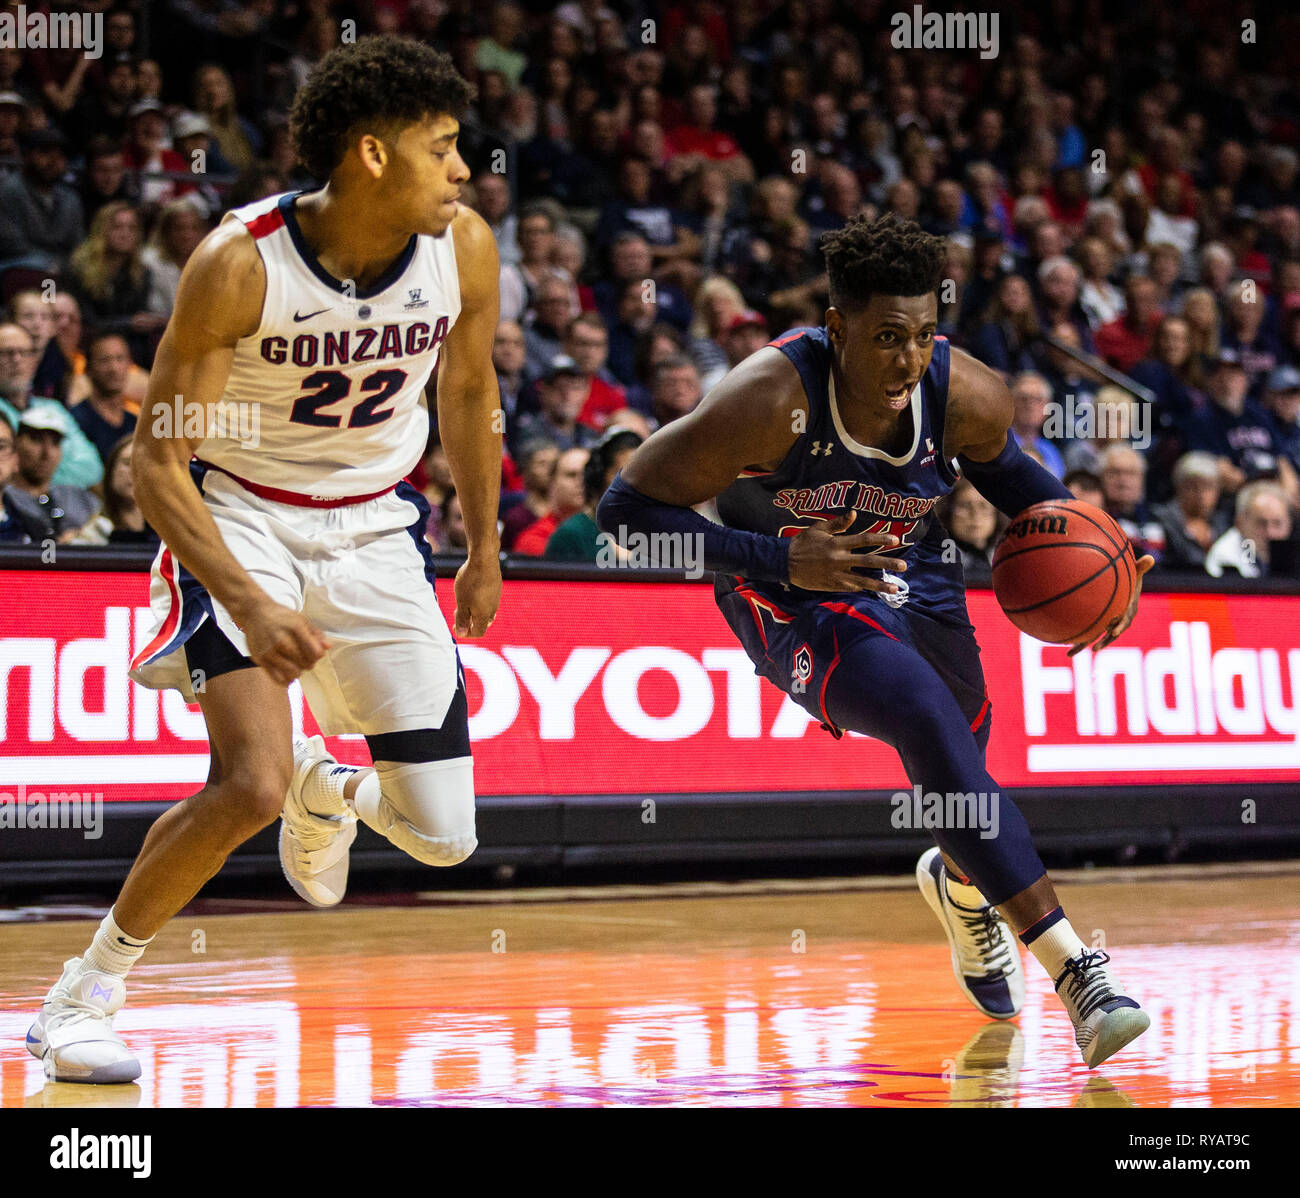 Mar 12 2019 Las Vegas, NV, U.S.A. St. Mary's forward Malik Fitts (24) drives to the basket during the NCAA West Coast Conference Men's Basketball Tournament championship between the Gonzaga Bulldogs and the Saint Mary's Gaels 60-47 win at Orleans Arena Las Vegas, NV. Thurman James/CSM Stock Photo